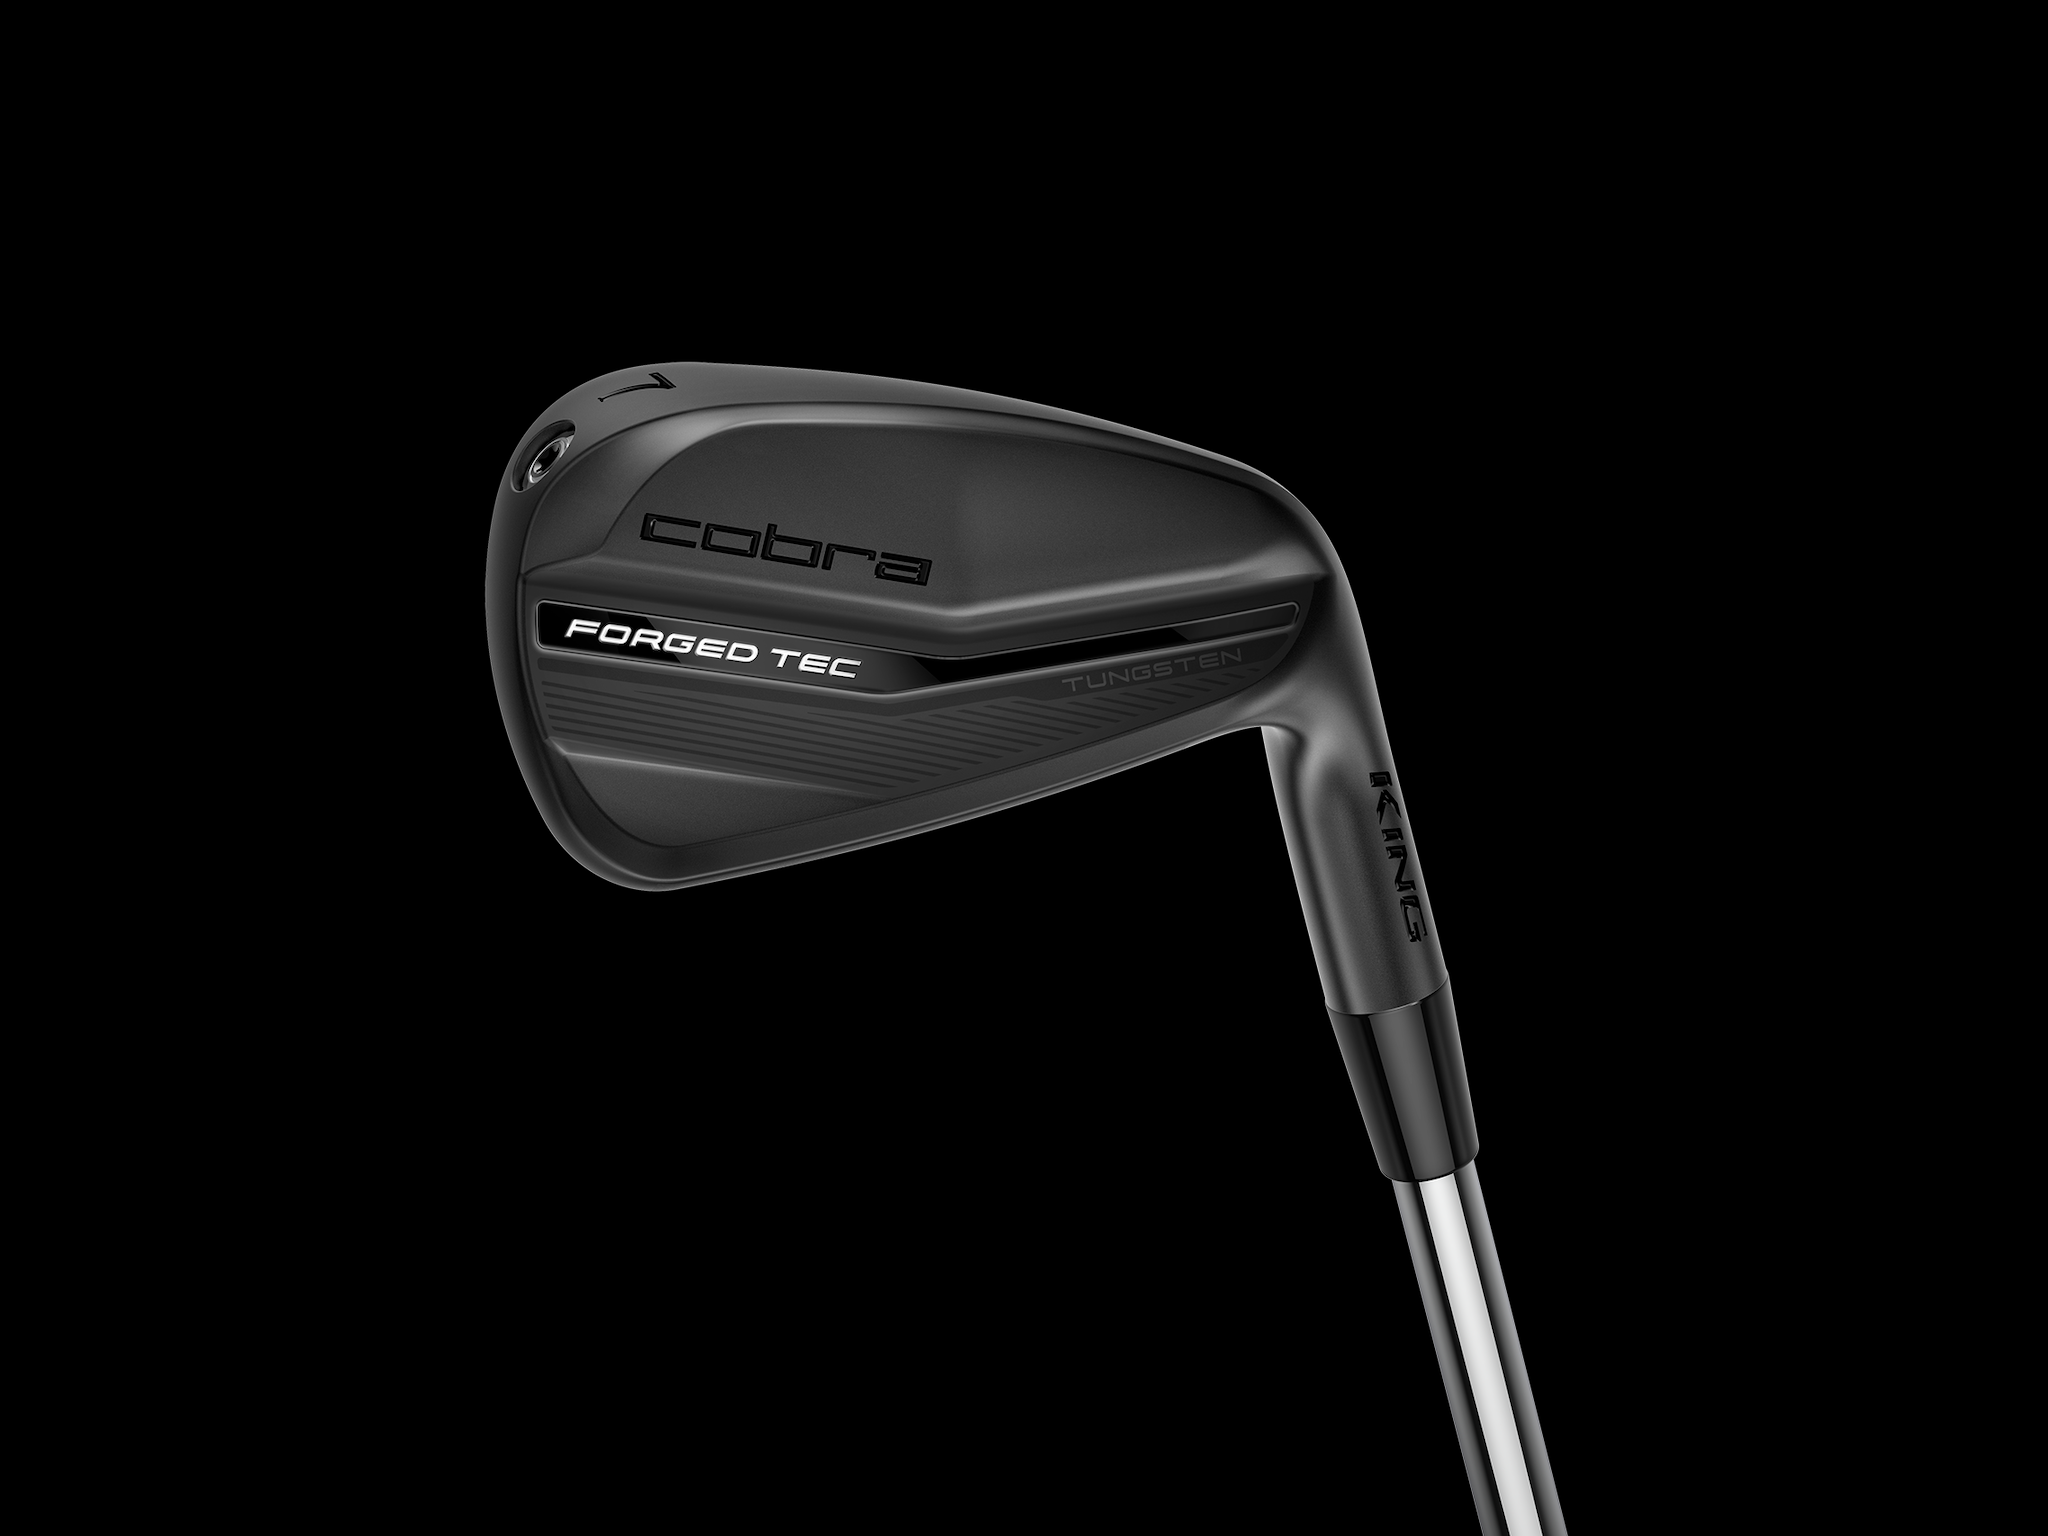 Cobra Golf launches limited-edition King Forged TEC Black irons – GolfWRX